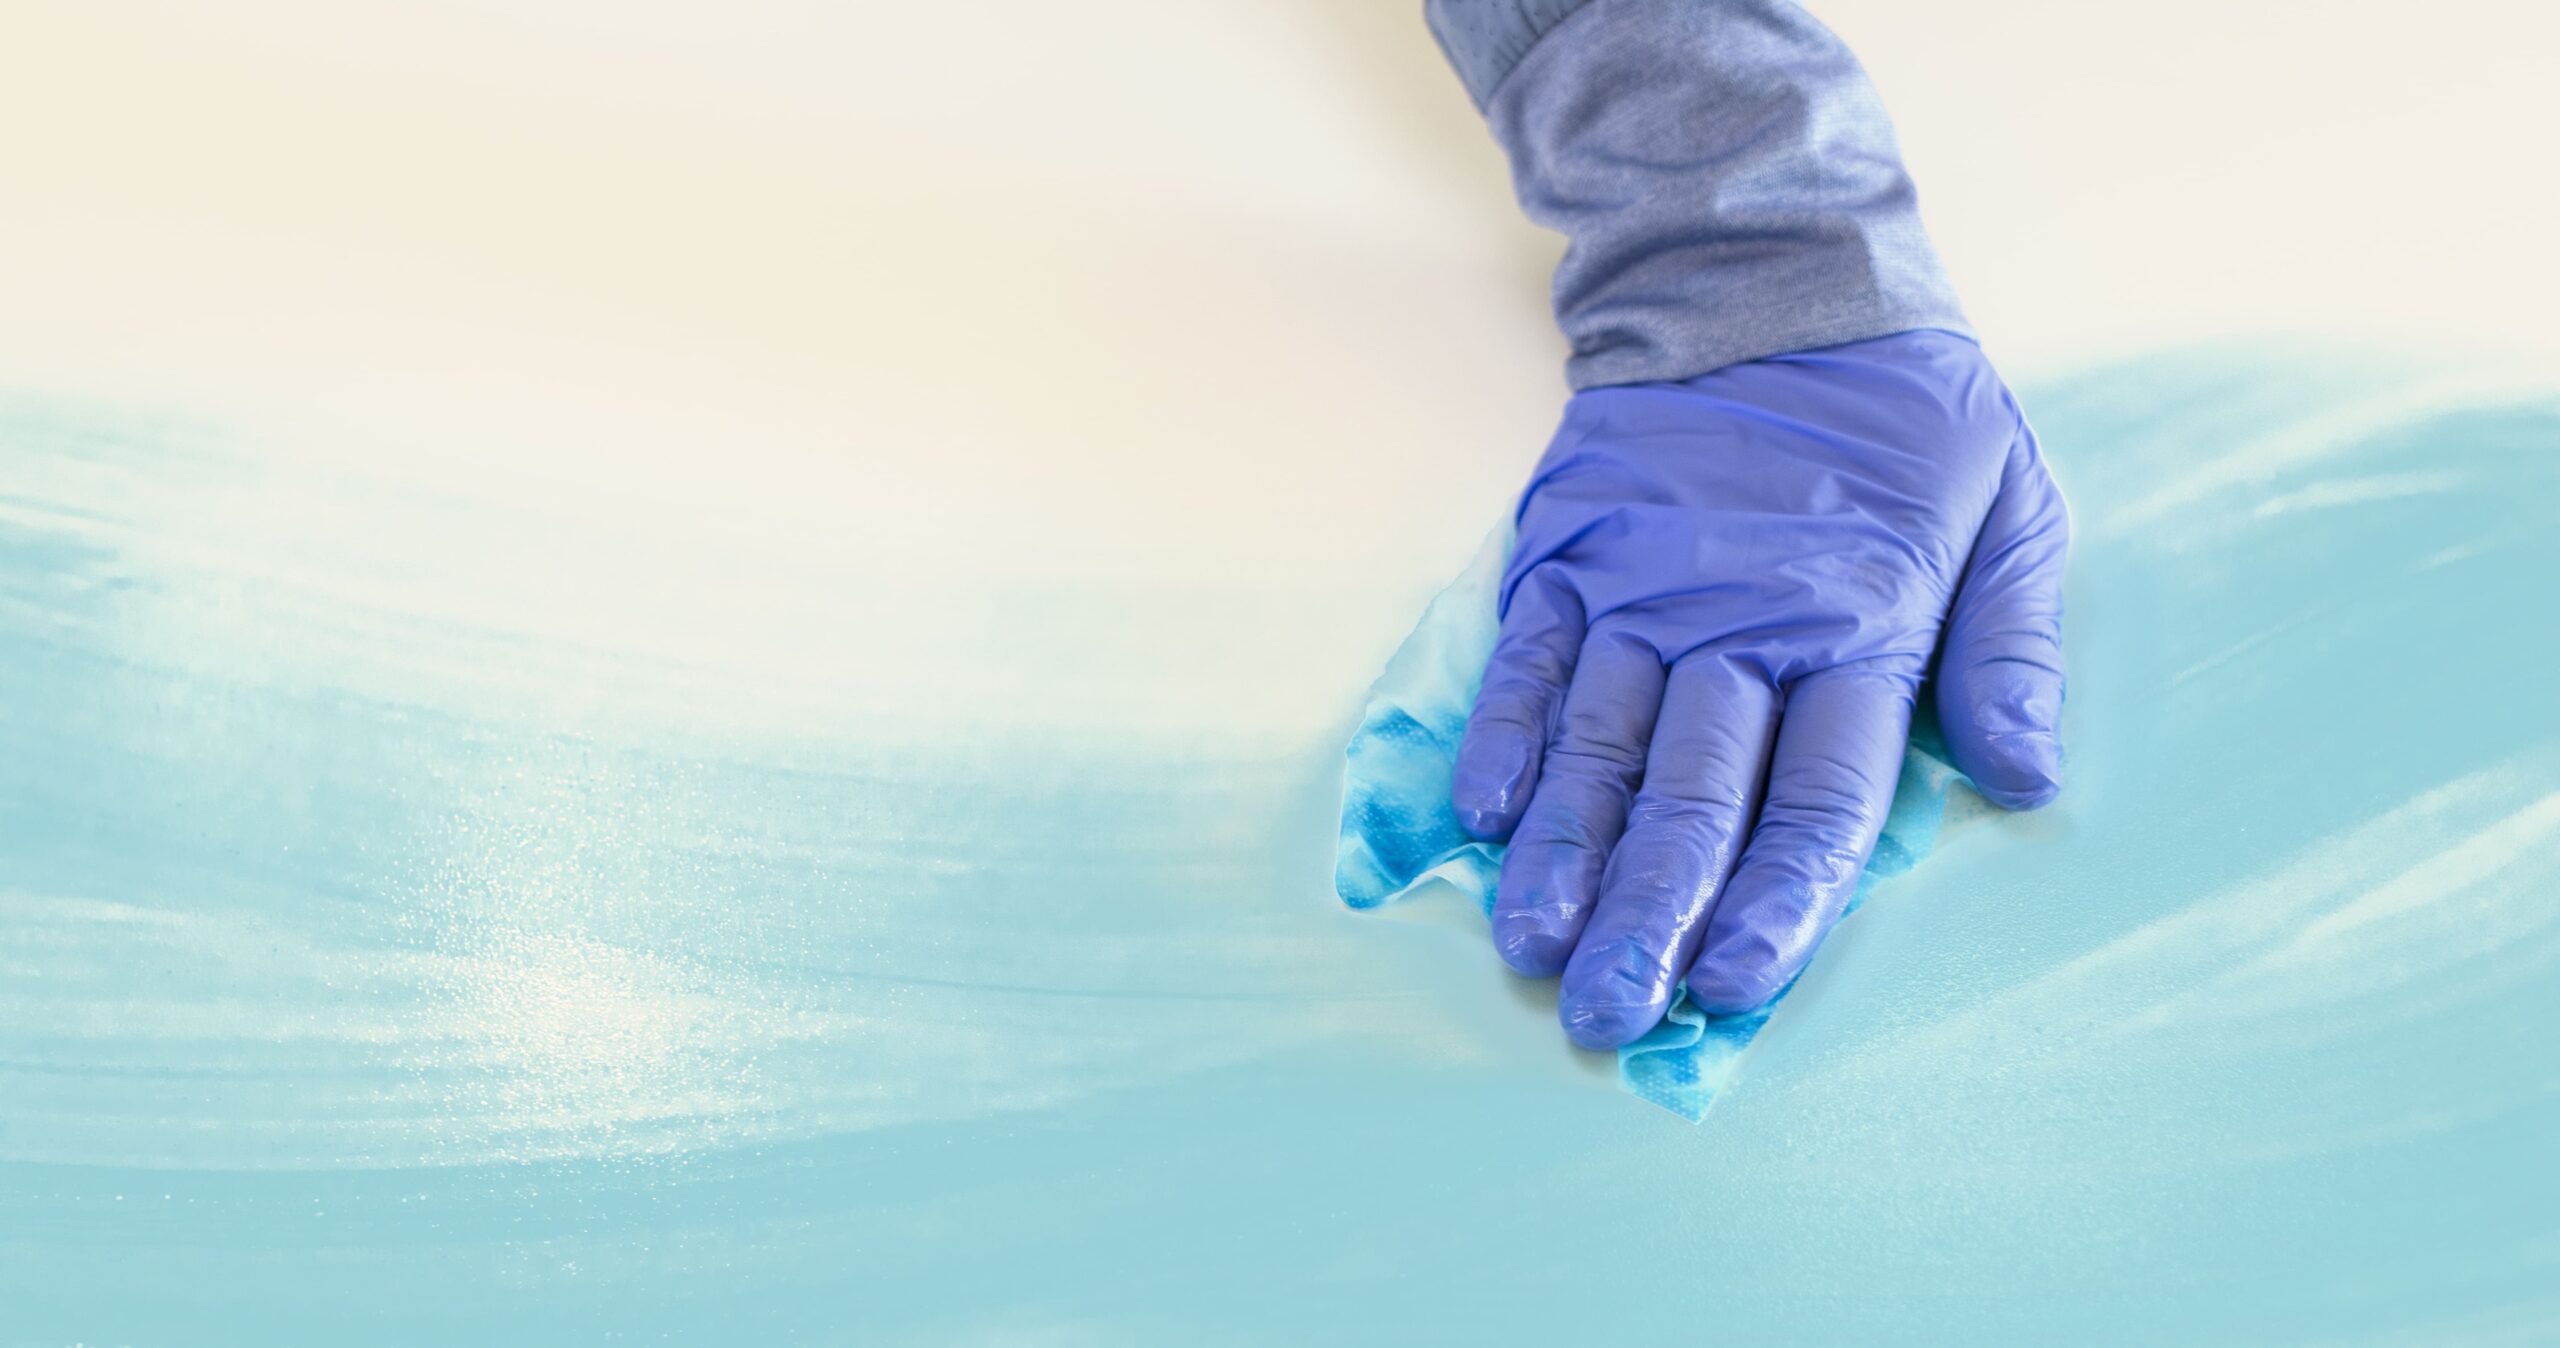 If You Could See Where You Cleaned, Could It Reduce Hospital-Acquired Infections?